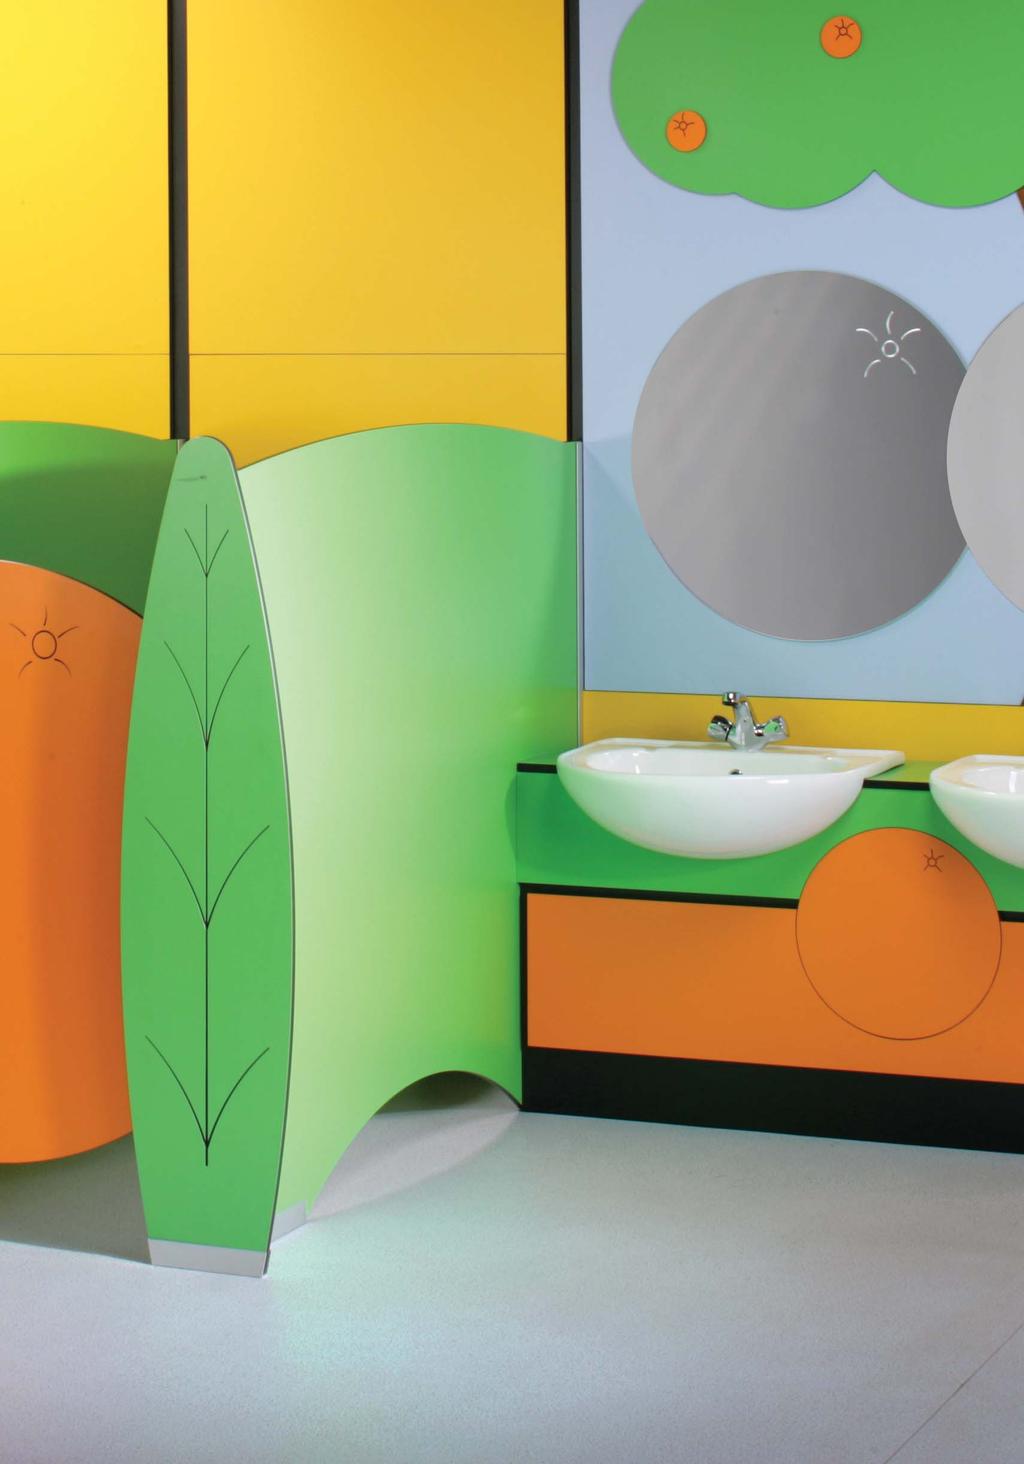 spotlight on education A dedicated solution for educational washrooms from one of the UK s leading washroom specialists, ideal for nursery right through